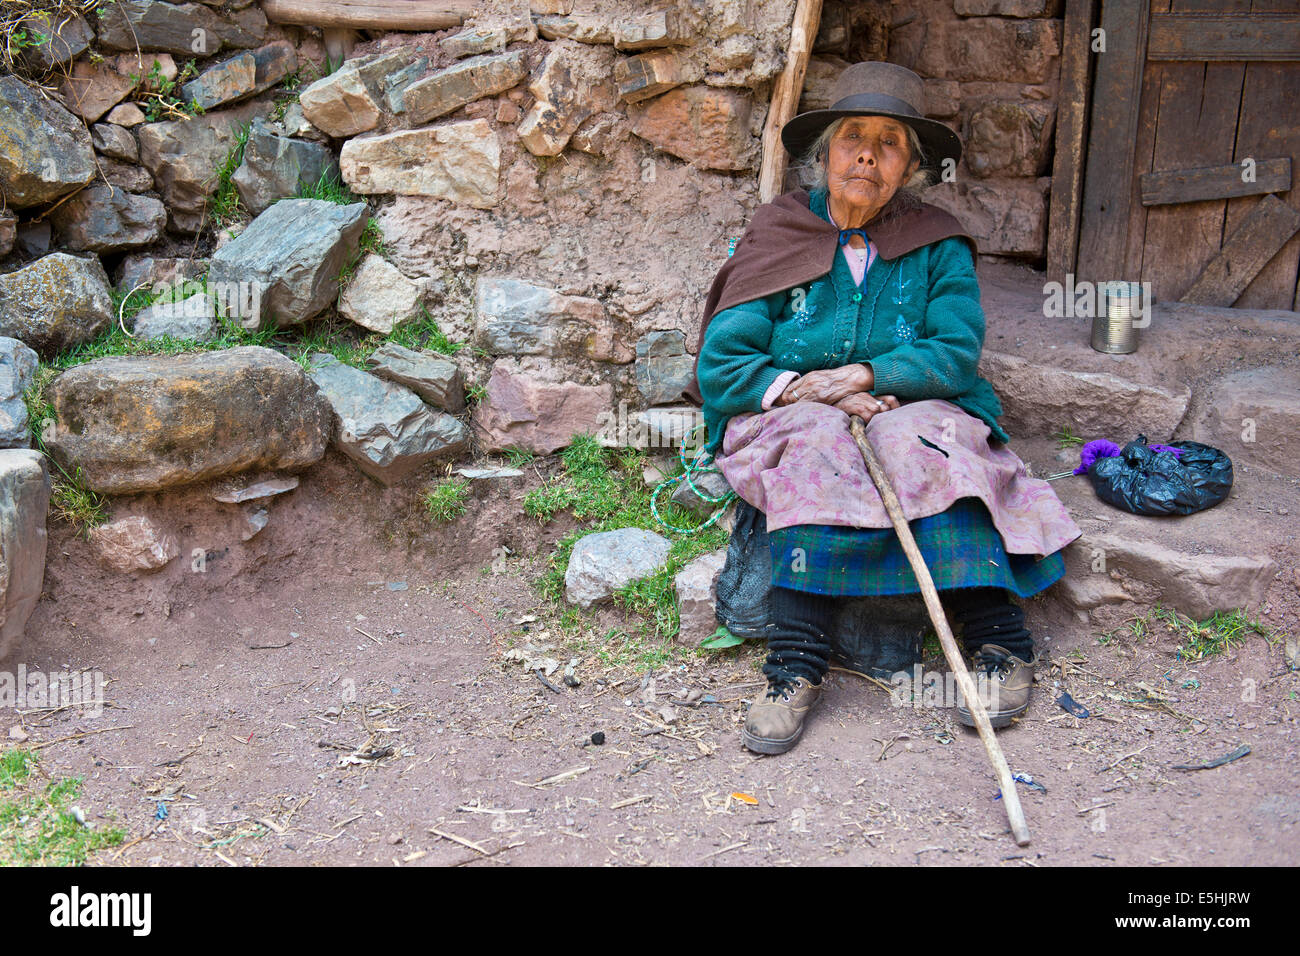 Mature Quechua Indian woman wearing a hat sitting on a stone in front of a doorway, Cordillera Huayhuash, Northern Peru, Peru Stock Photo